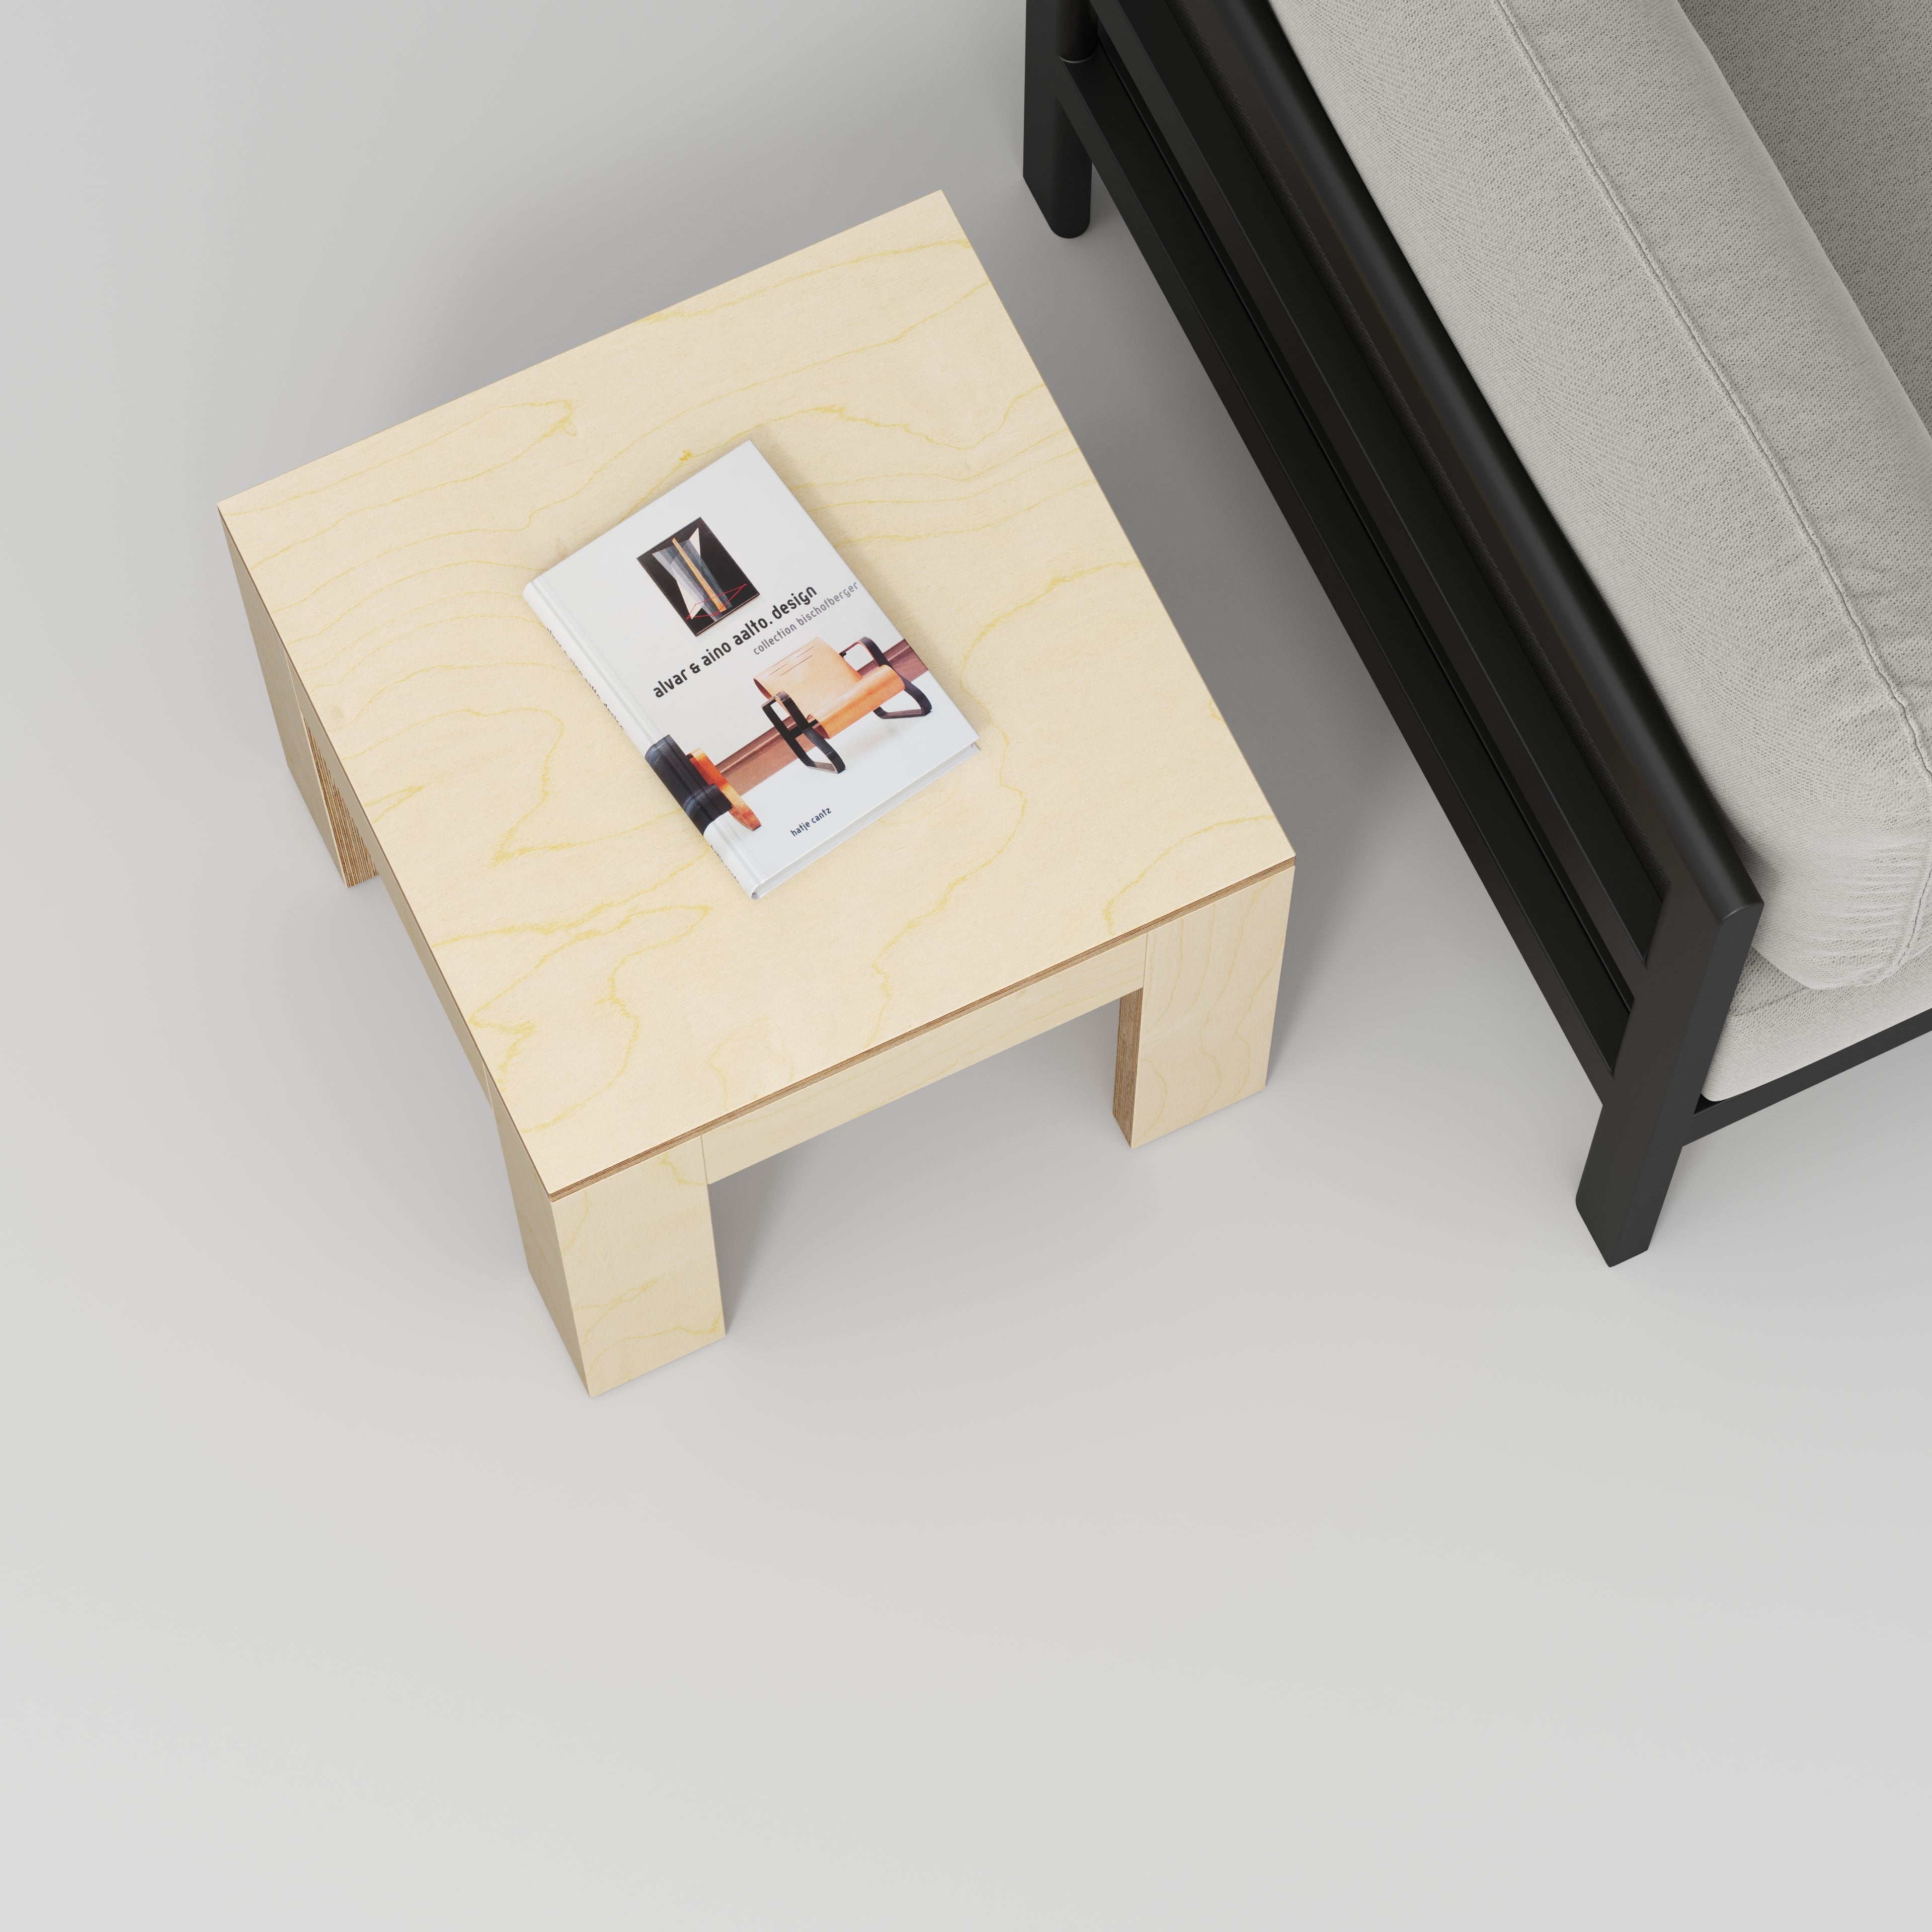 Side Table with Solid Frame - Plywood Birch - 500(w) x 500(d) x 450(h)